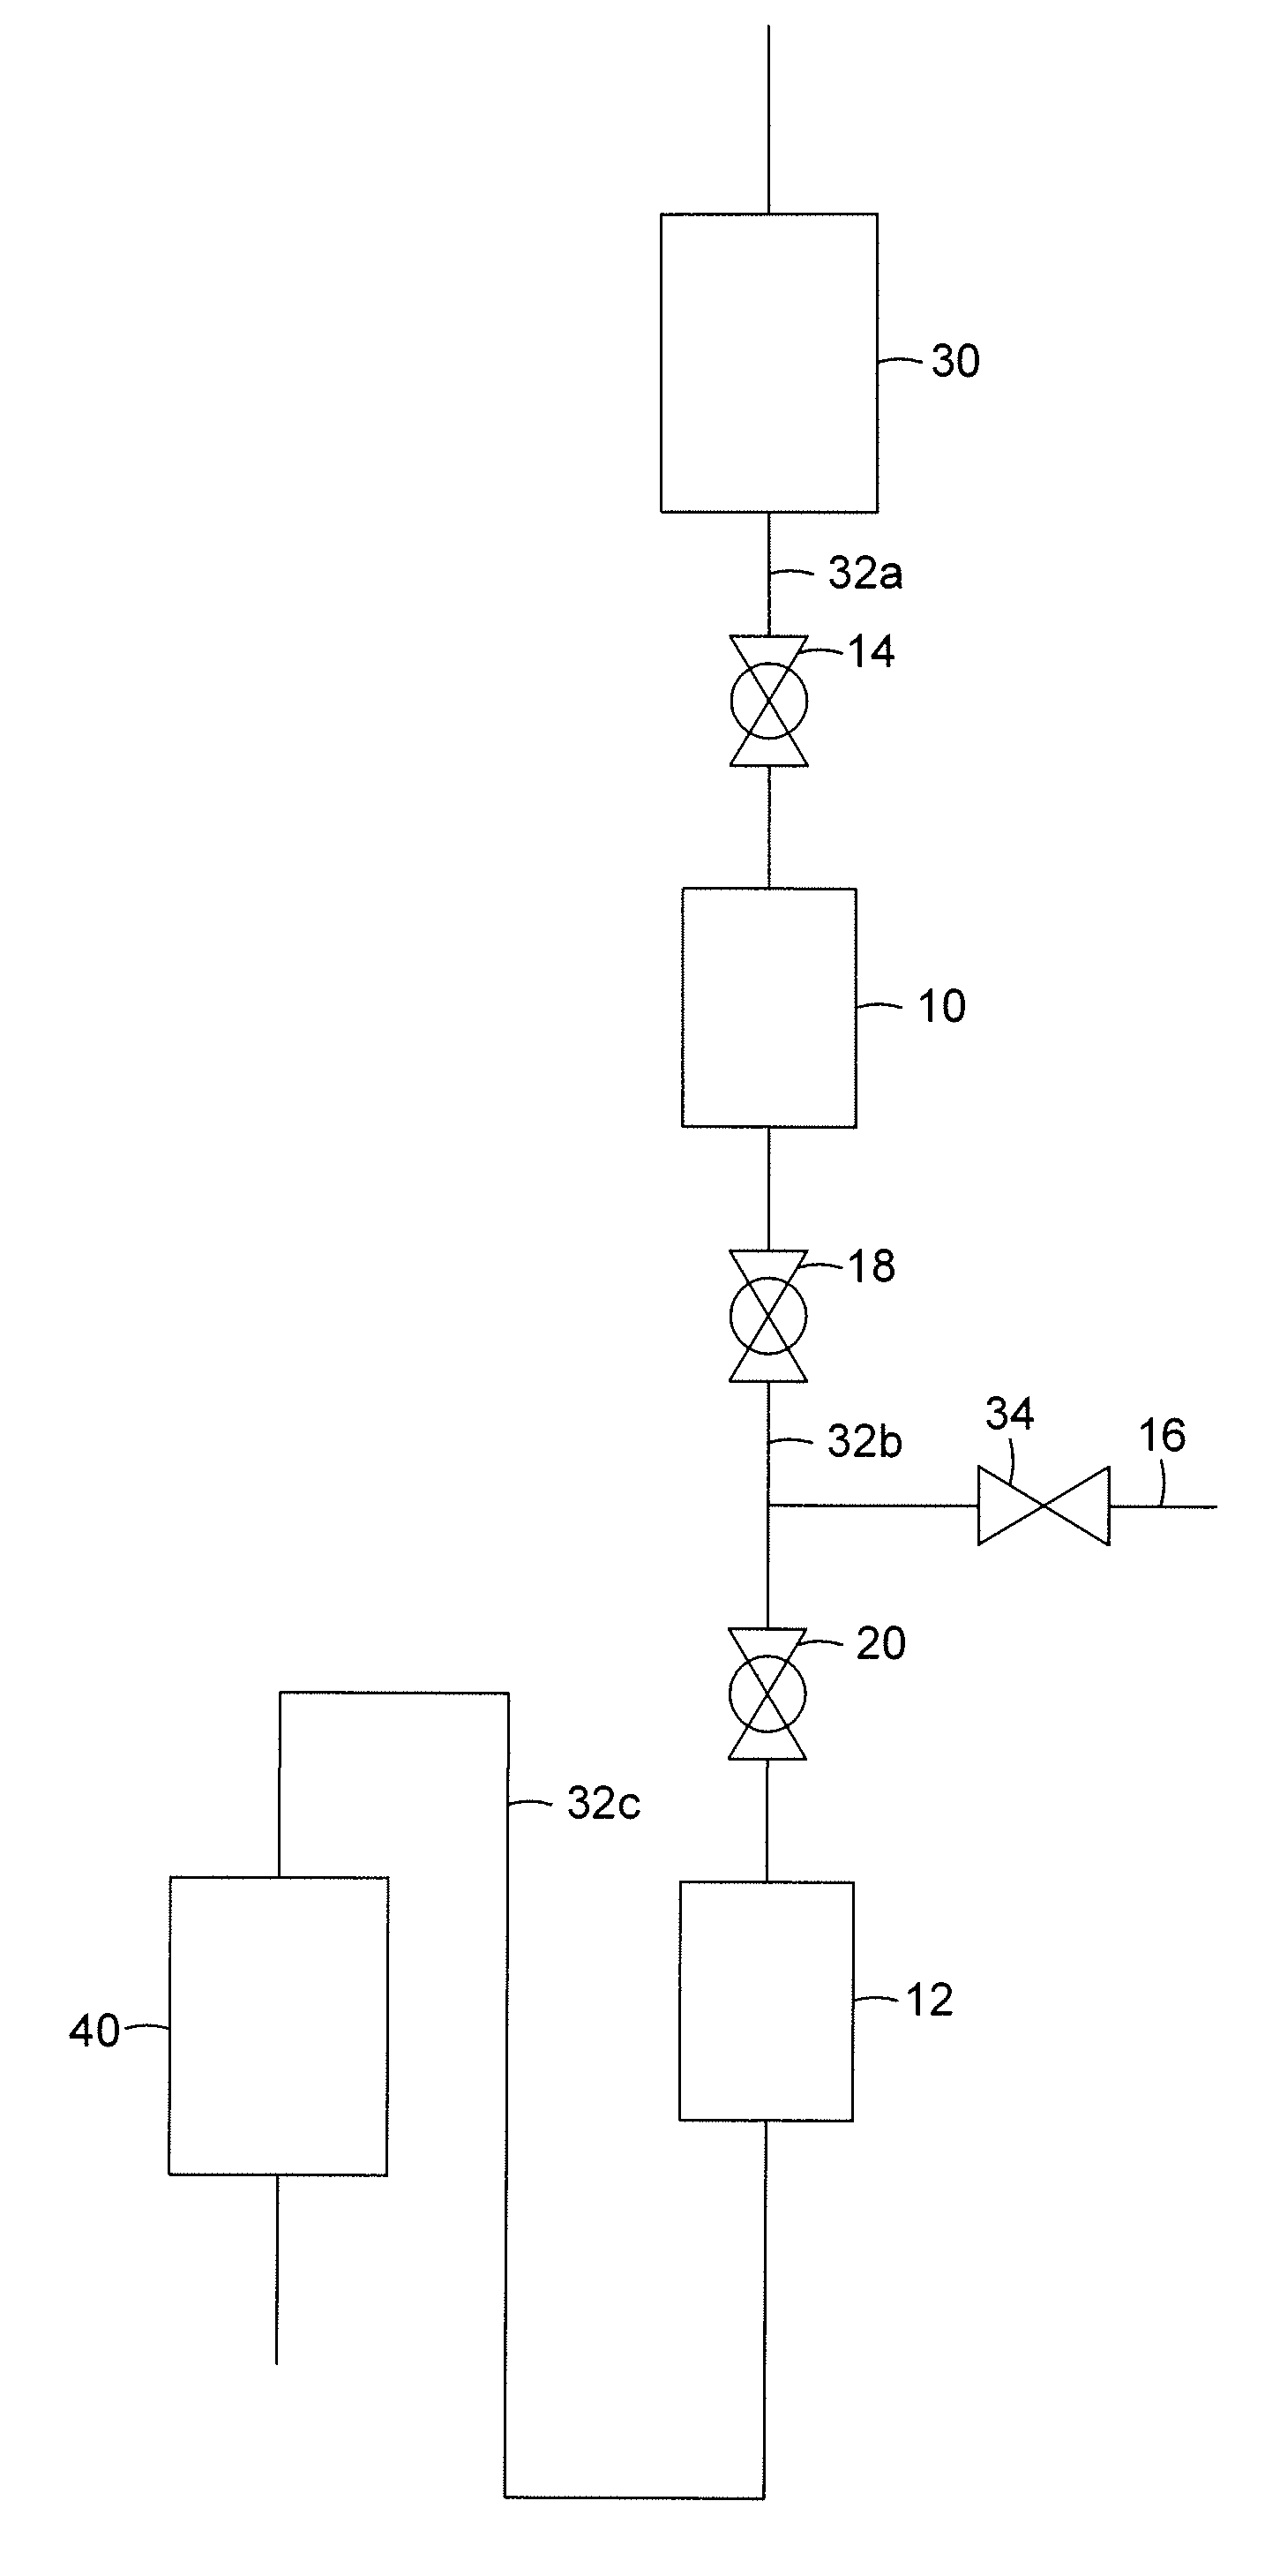 Device to transfer catalyst from a low pressure vessel to a high pressure vessel and purge the transferred catalyst